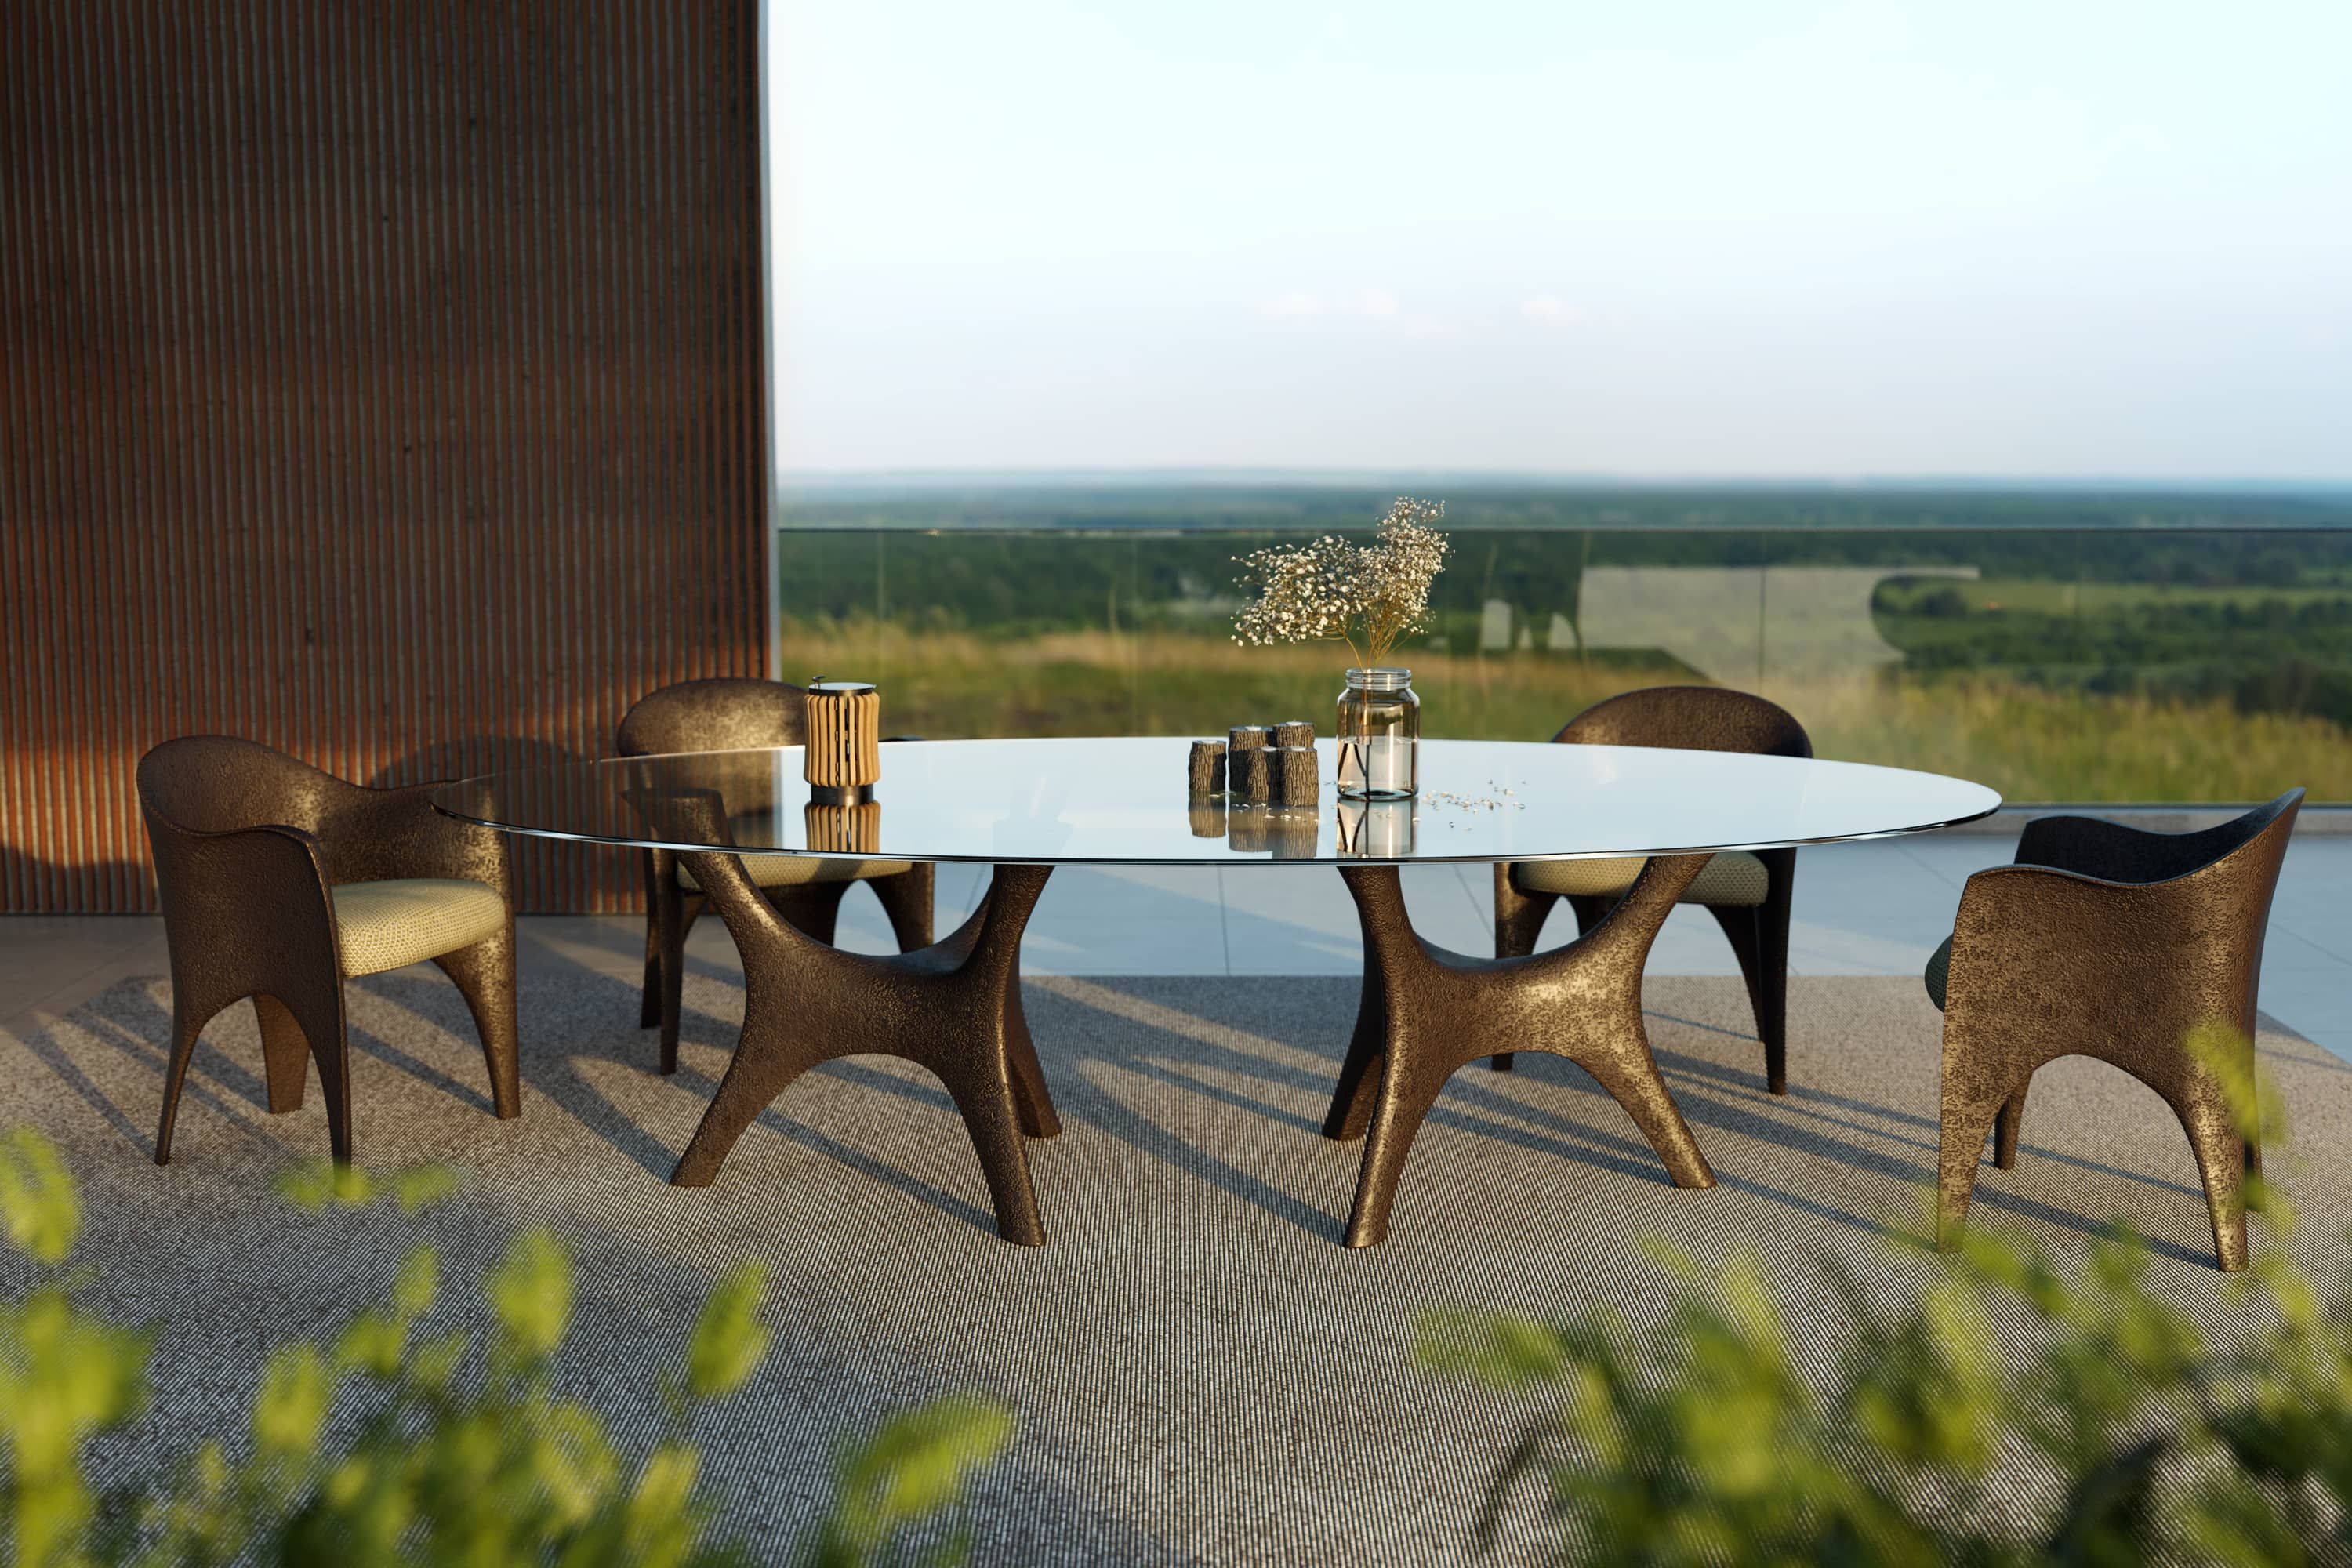 Kosmo dining table and Oceano chairs with special finish for outdoor